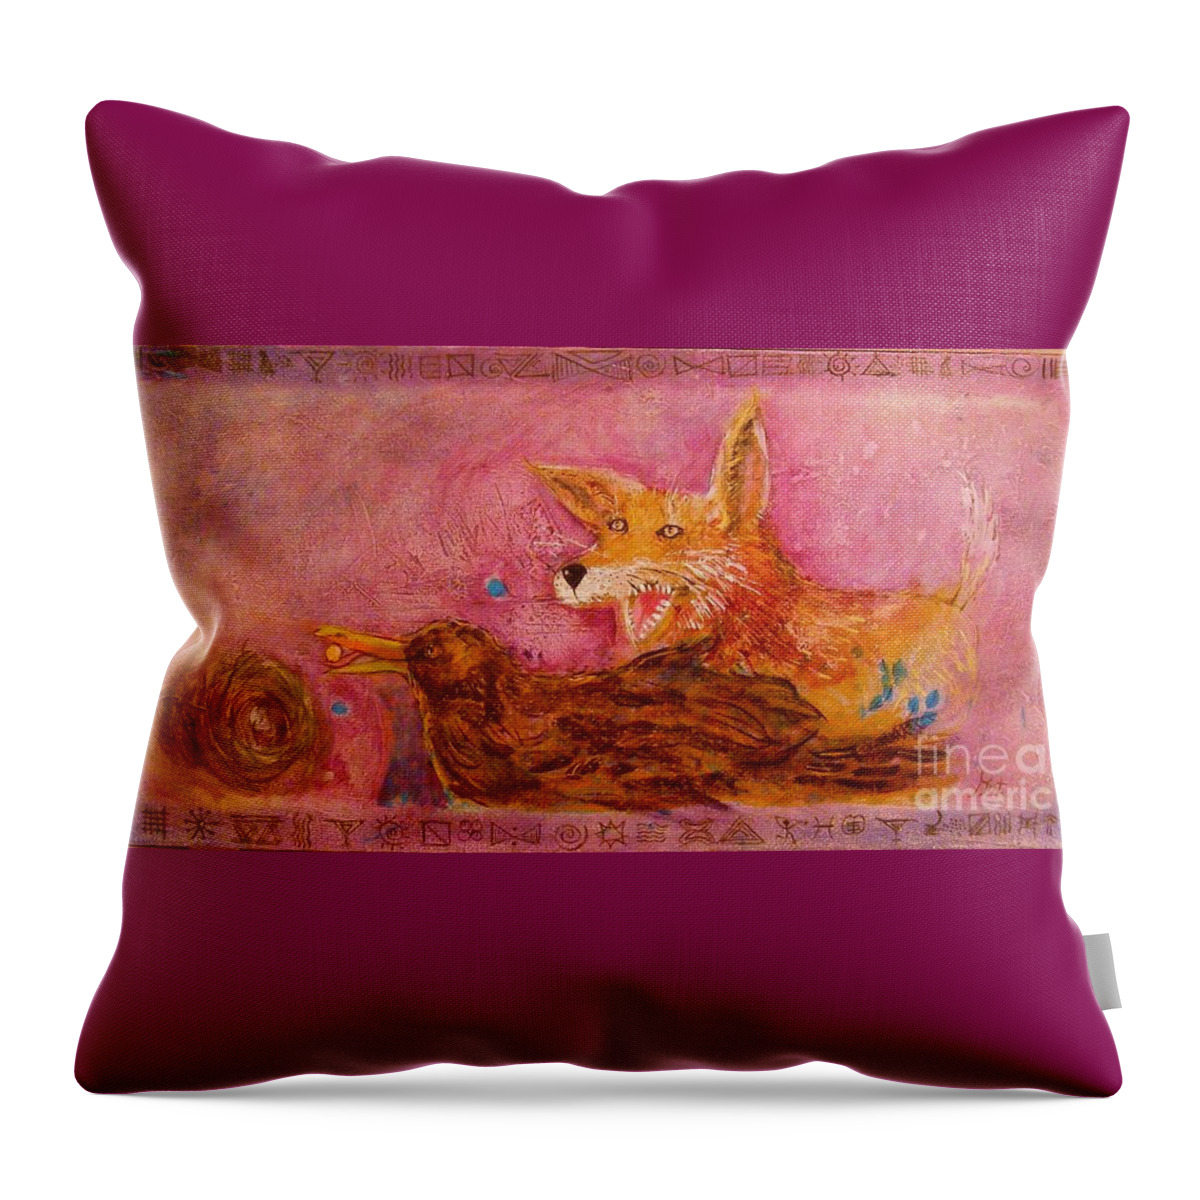 Folk Tale Throw Pillow featuring the painting Bre Fox and Bre Crow by Gertrude Palmer